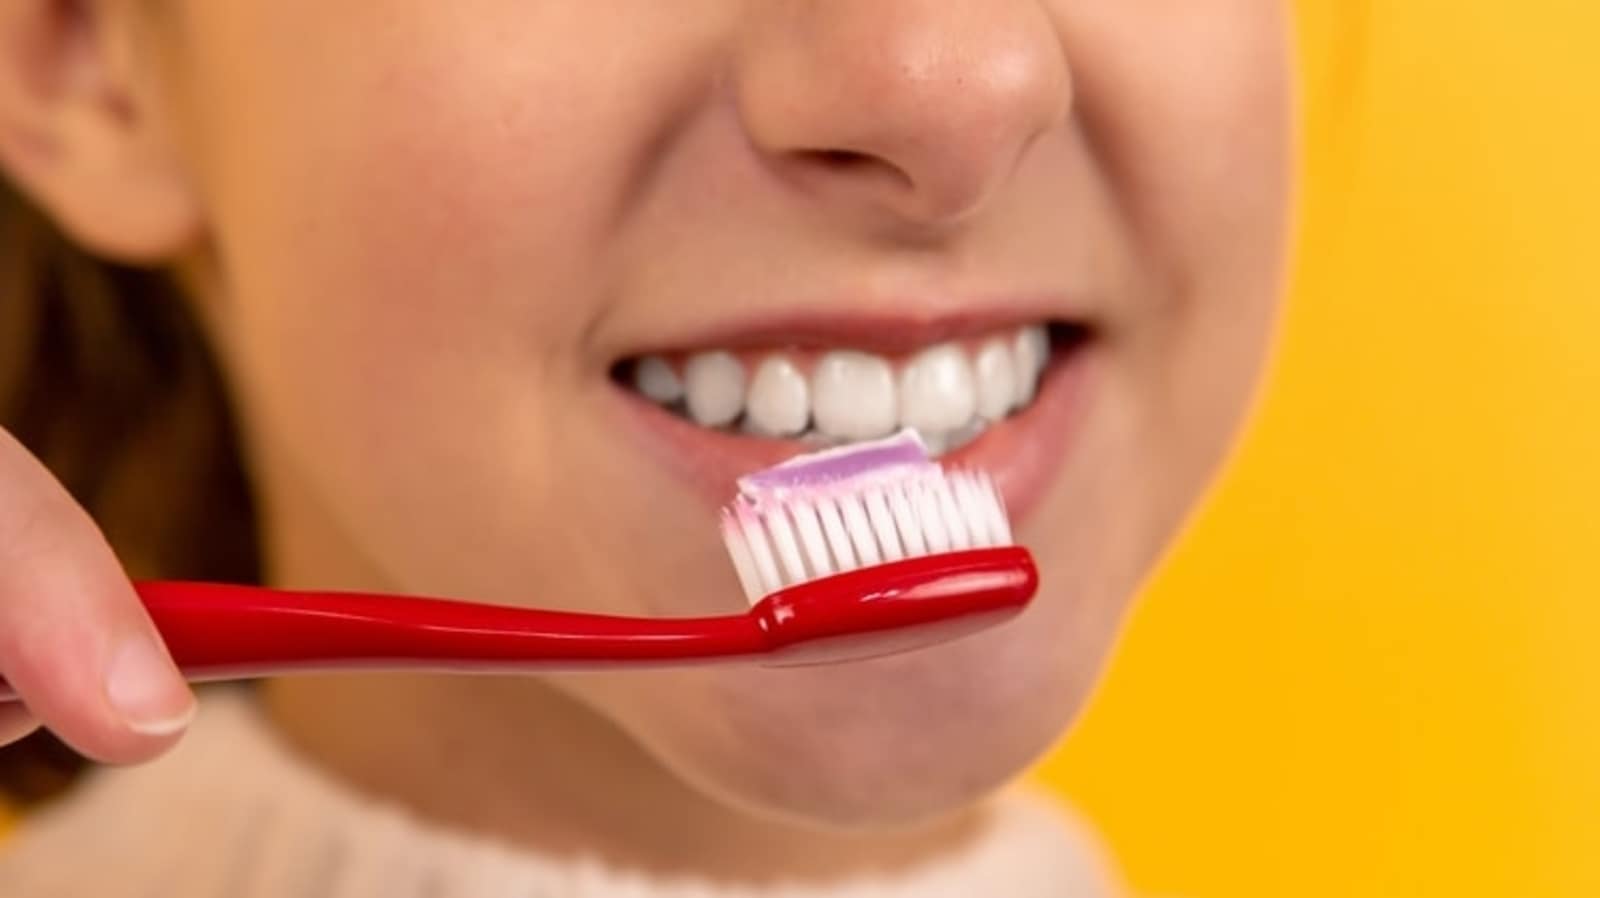 Here’s how simple oral hygiene can help reduce the severity of Covid-19.